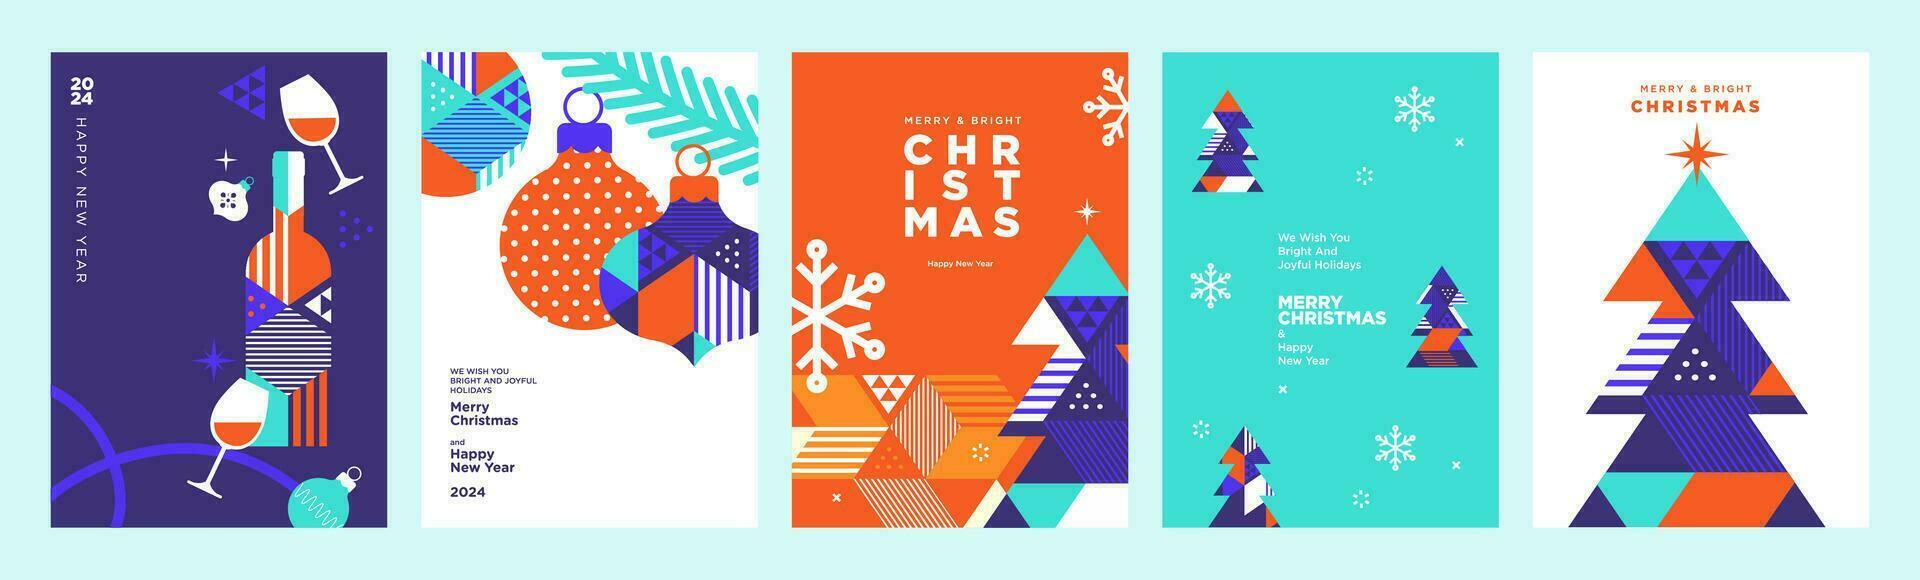 Merry Christmas and Happy New Year 2024 greeting cards. Vector illustration concepts for background, greeting card, party invitation card, website banner, social media banner, marketing material.